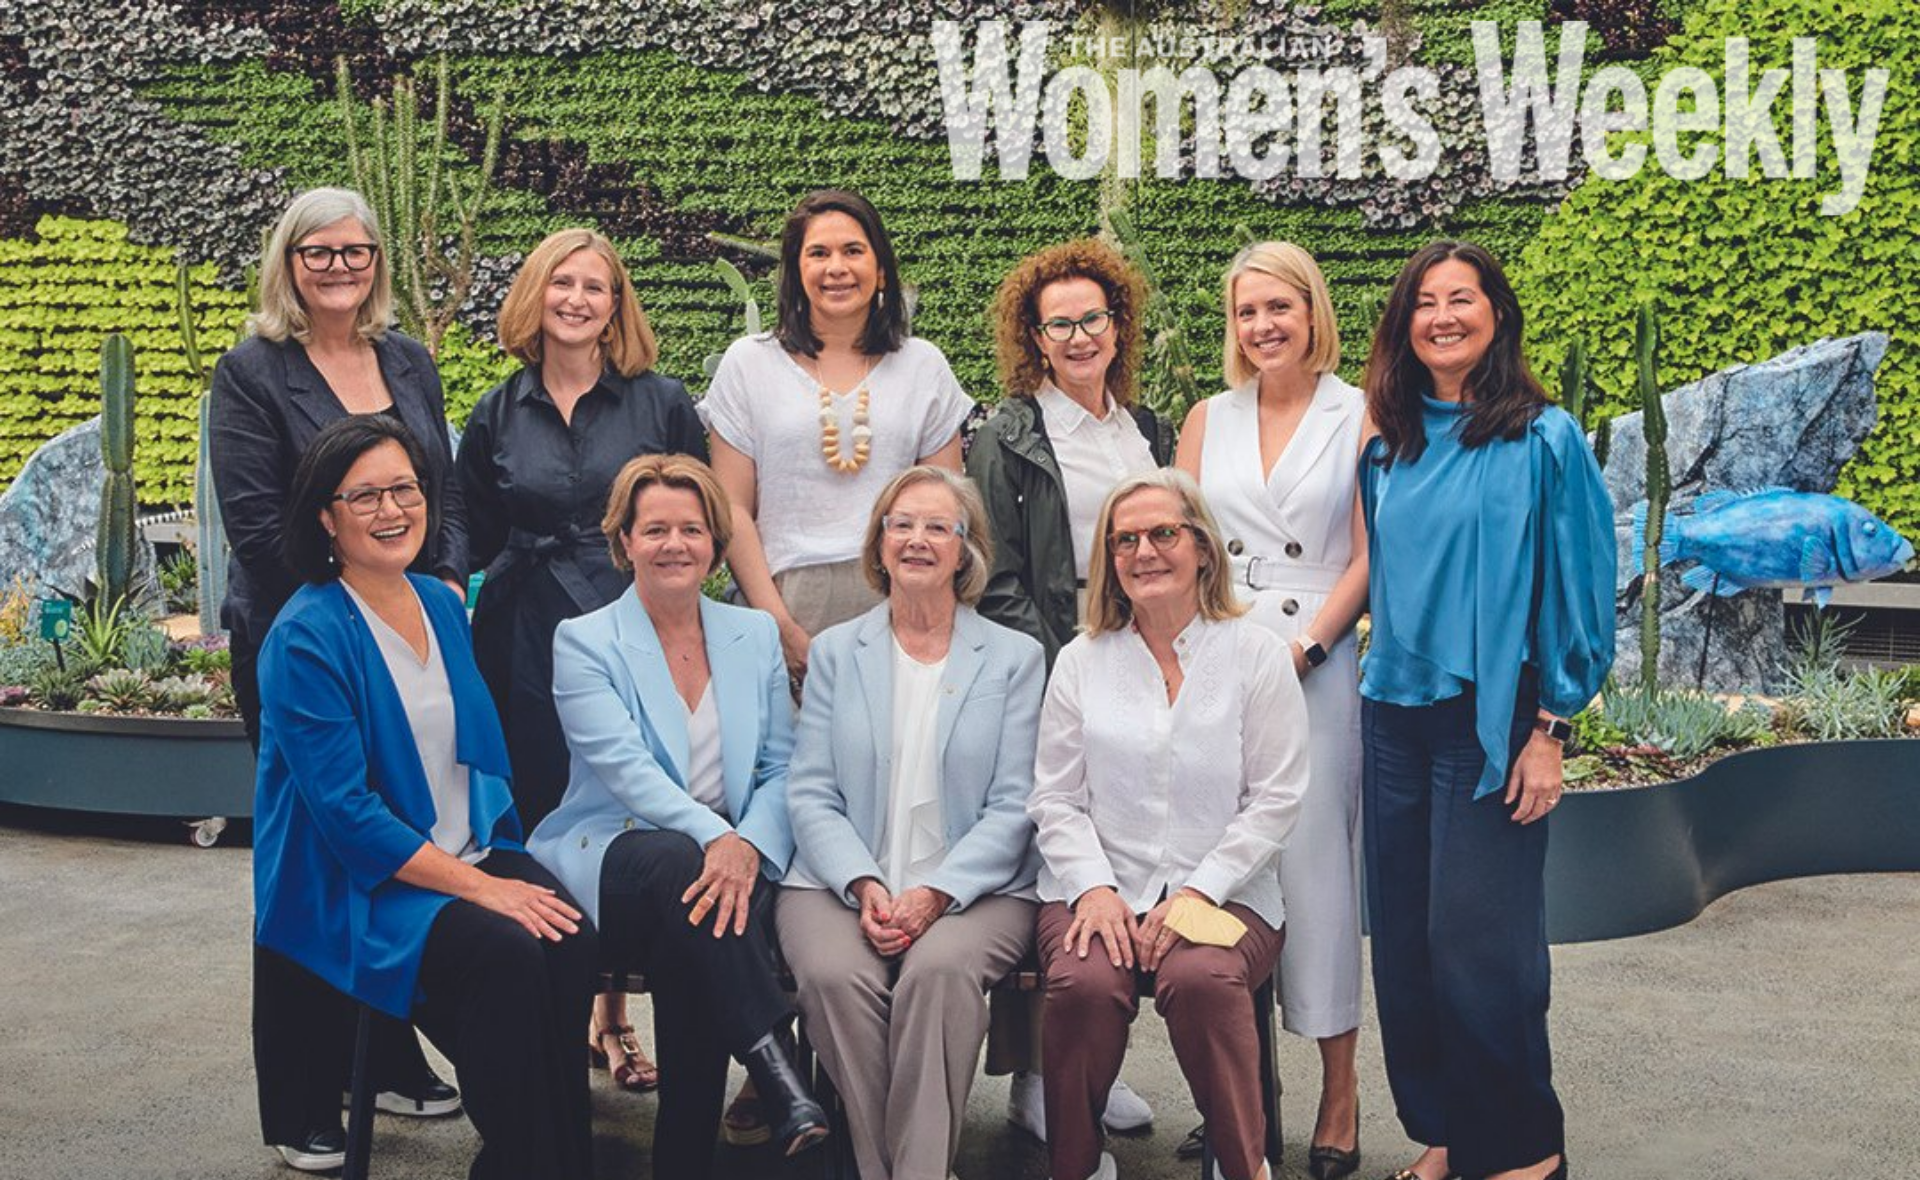 EXCLUSIVE: Australia’s most powerful women, from Nicola Forrest to Wendy McCarthy, join forces with a vision for change